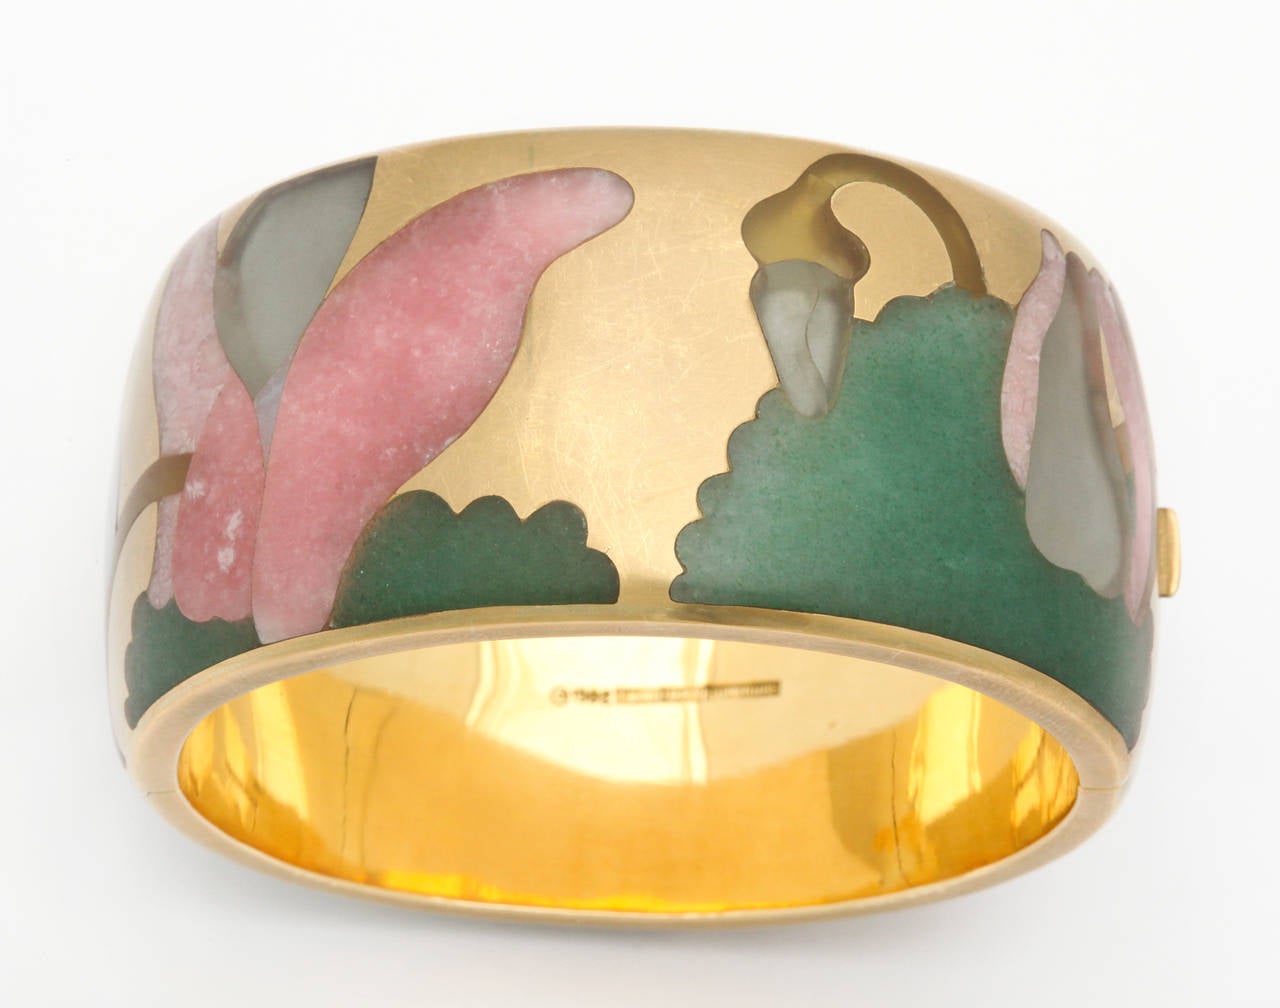 A beautiful 1982 multi stone inlay masterpiece by Tiffany & Co., designed by Angela Cummings. Hand carved multi color hard stones including jade, rose quartz, and rock crystal inlaid like puzzle pieces. The gold surface of the bracelet has a very